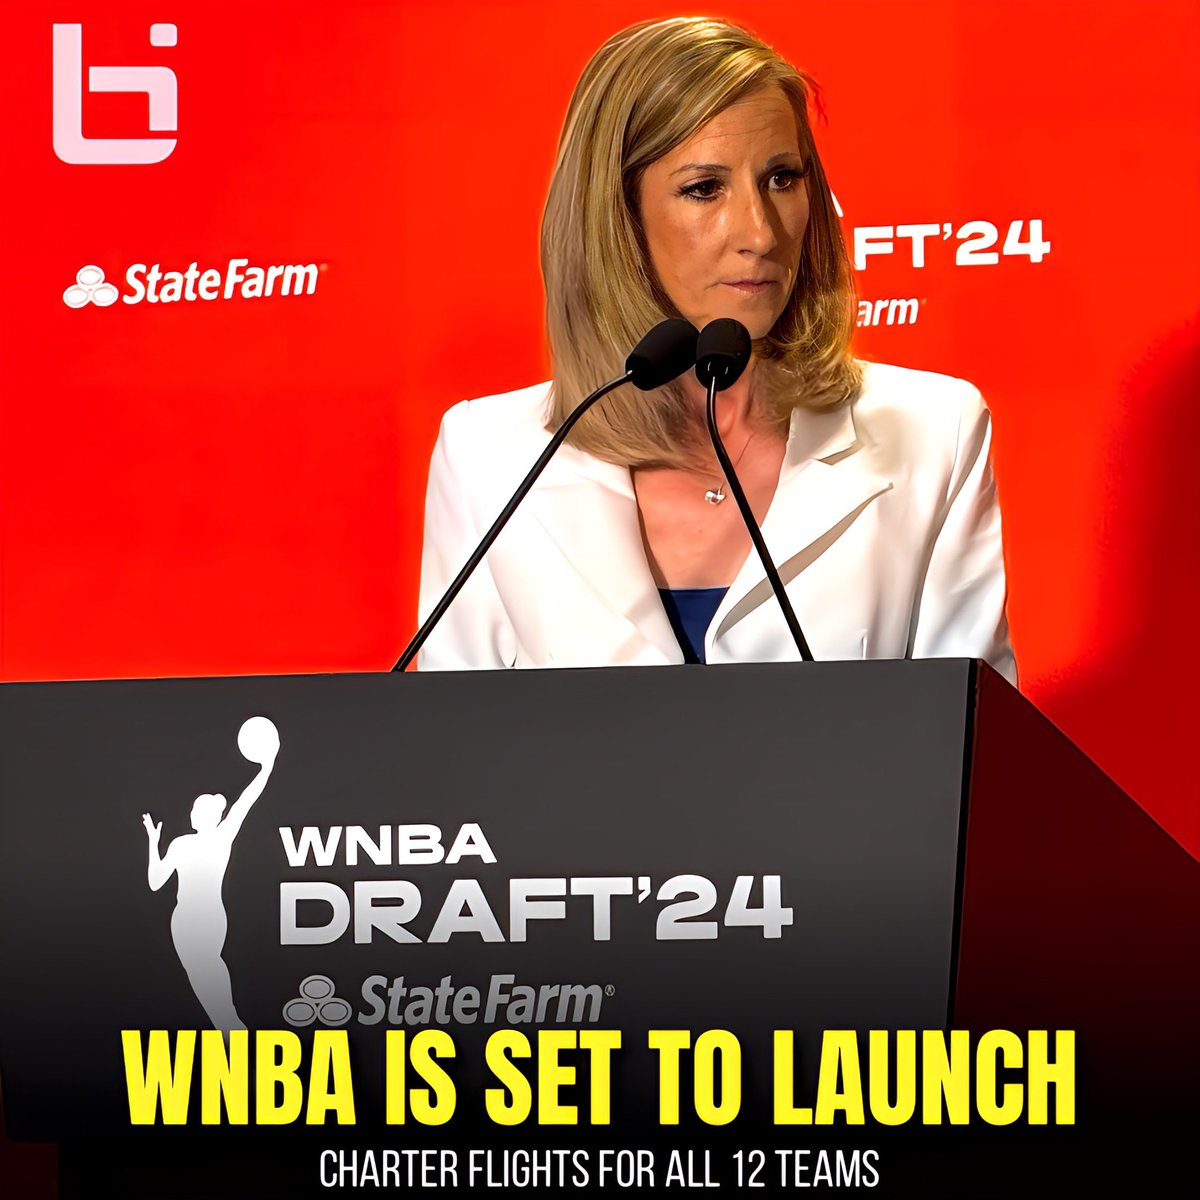 The WNBA is set to launch full-time charter flights for all 12 teams this season🔥